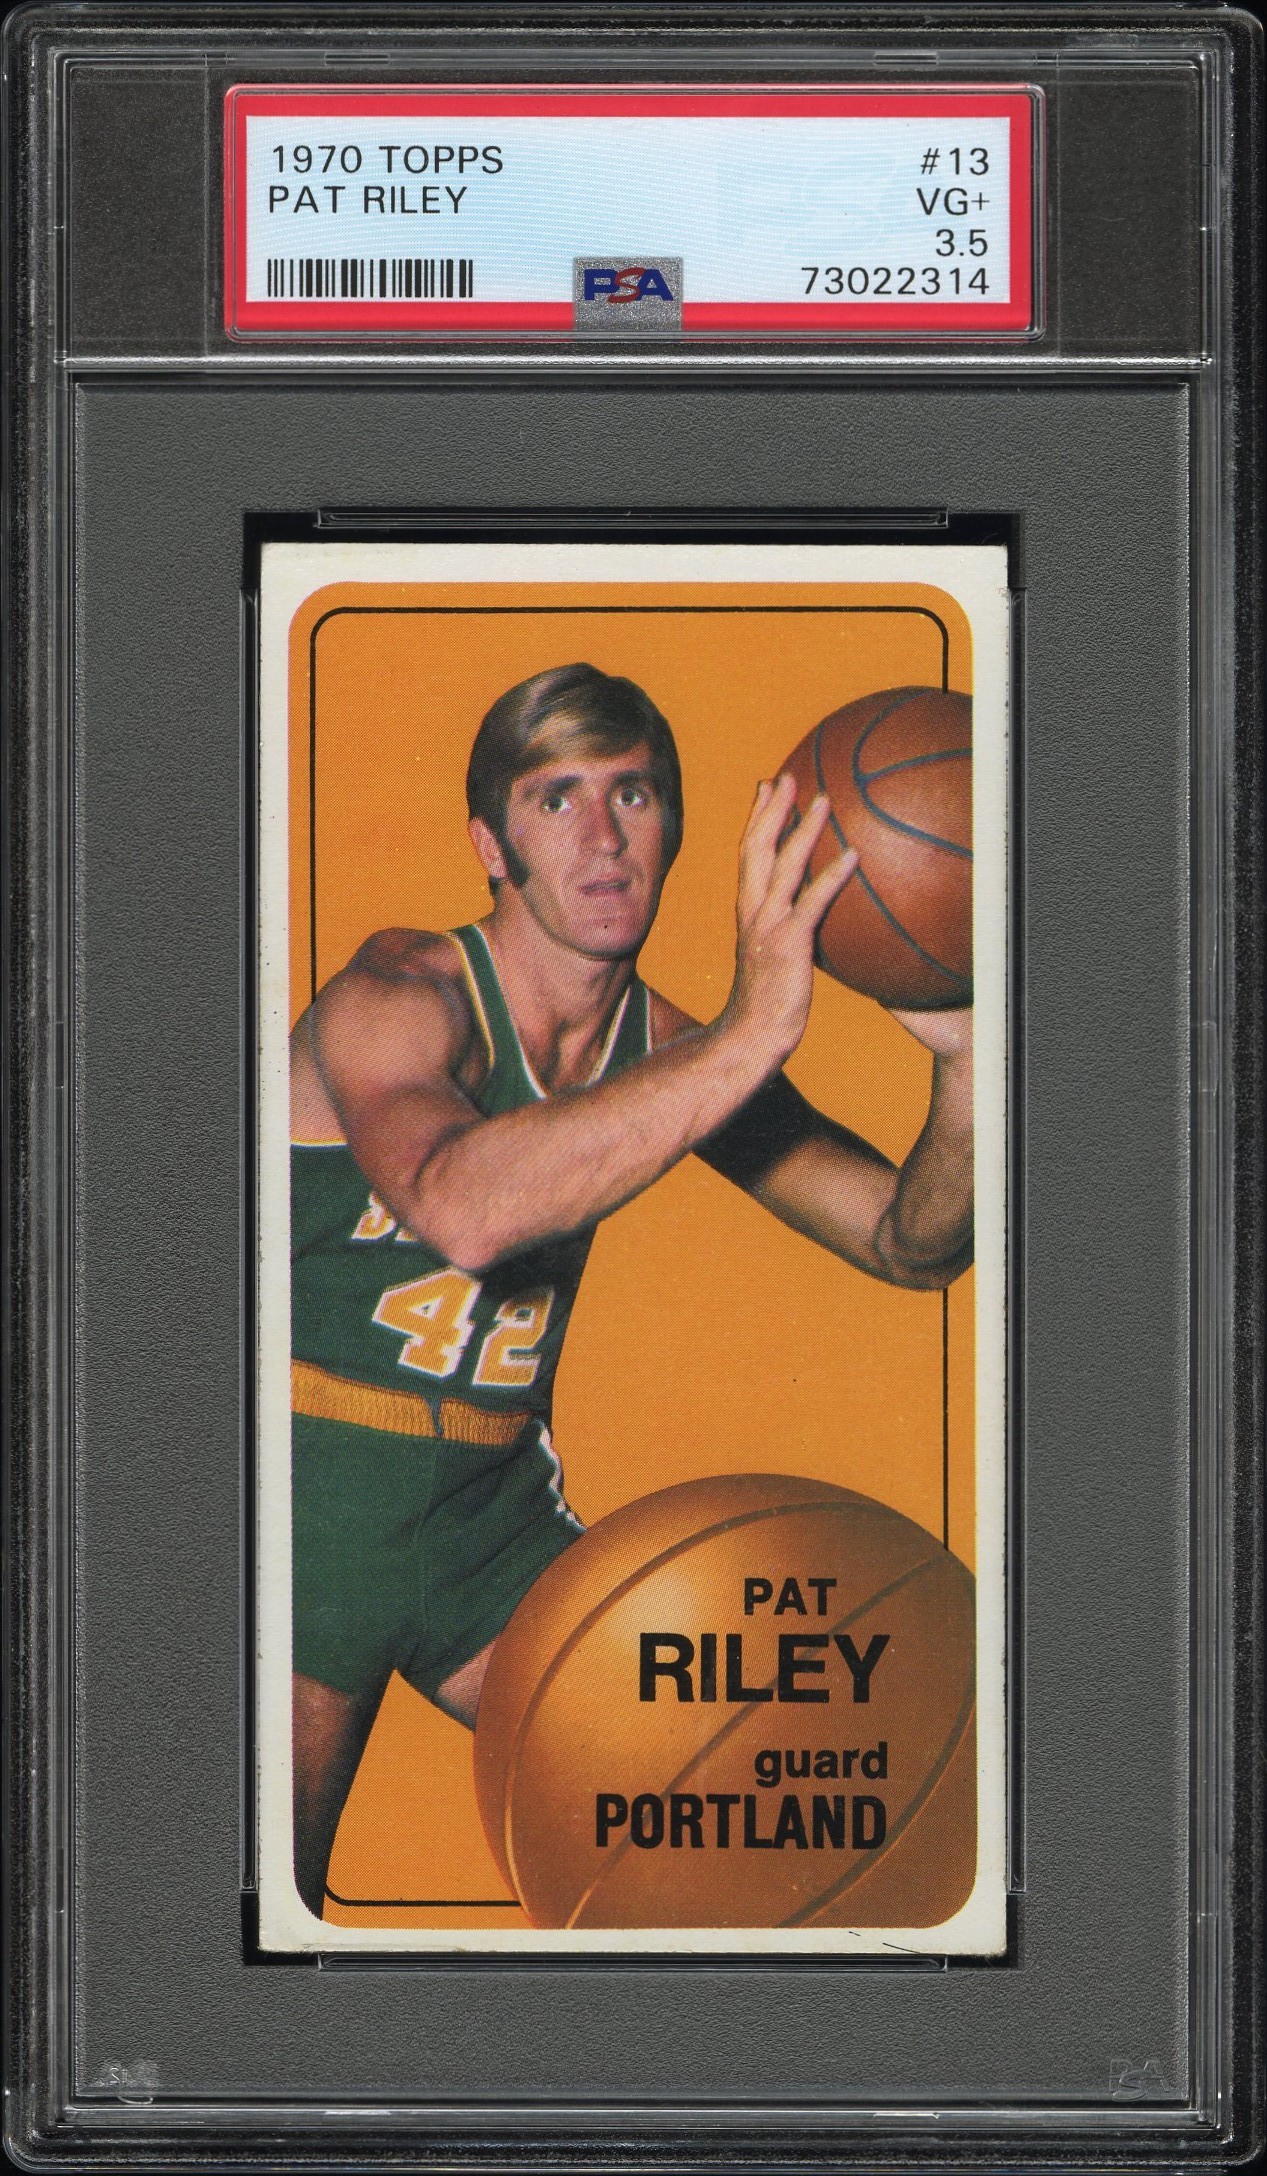 1970 Topps #13 Pat Riley Rookie Card - PSA VG+ 3.5